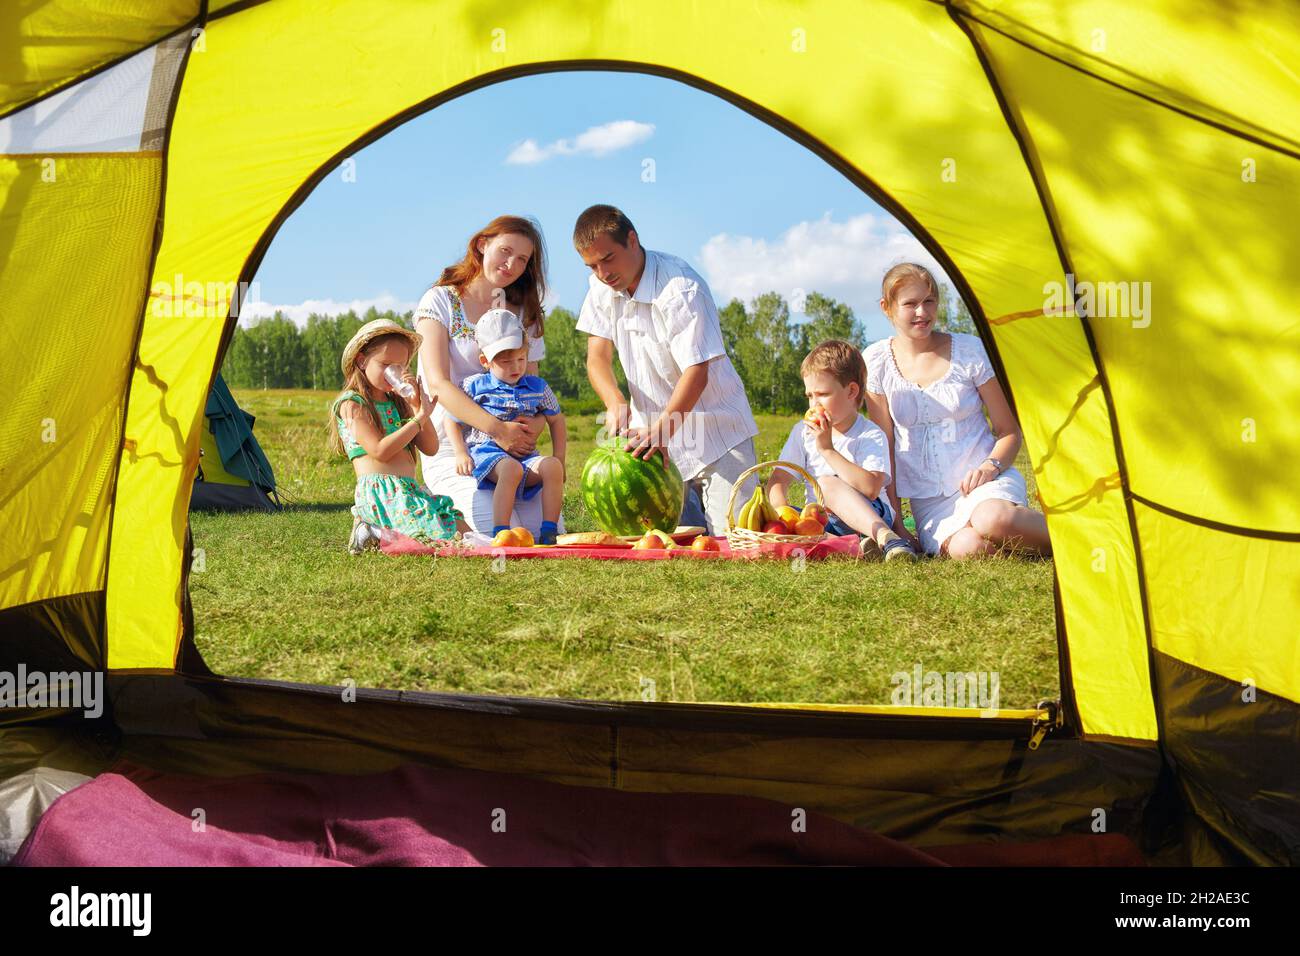 Outdoor group portrait of happy family having picnic on green grass in camp. Father is cutting watermelon.. View from camping tent entrance. Stock Photo